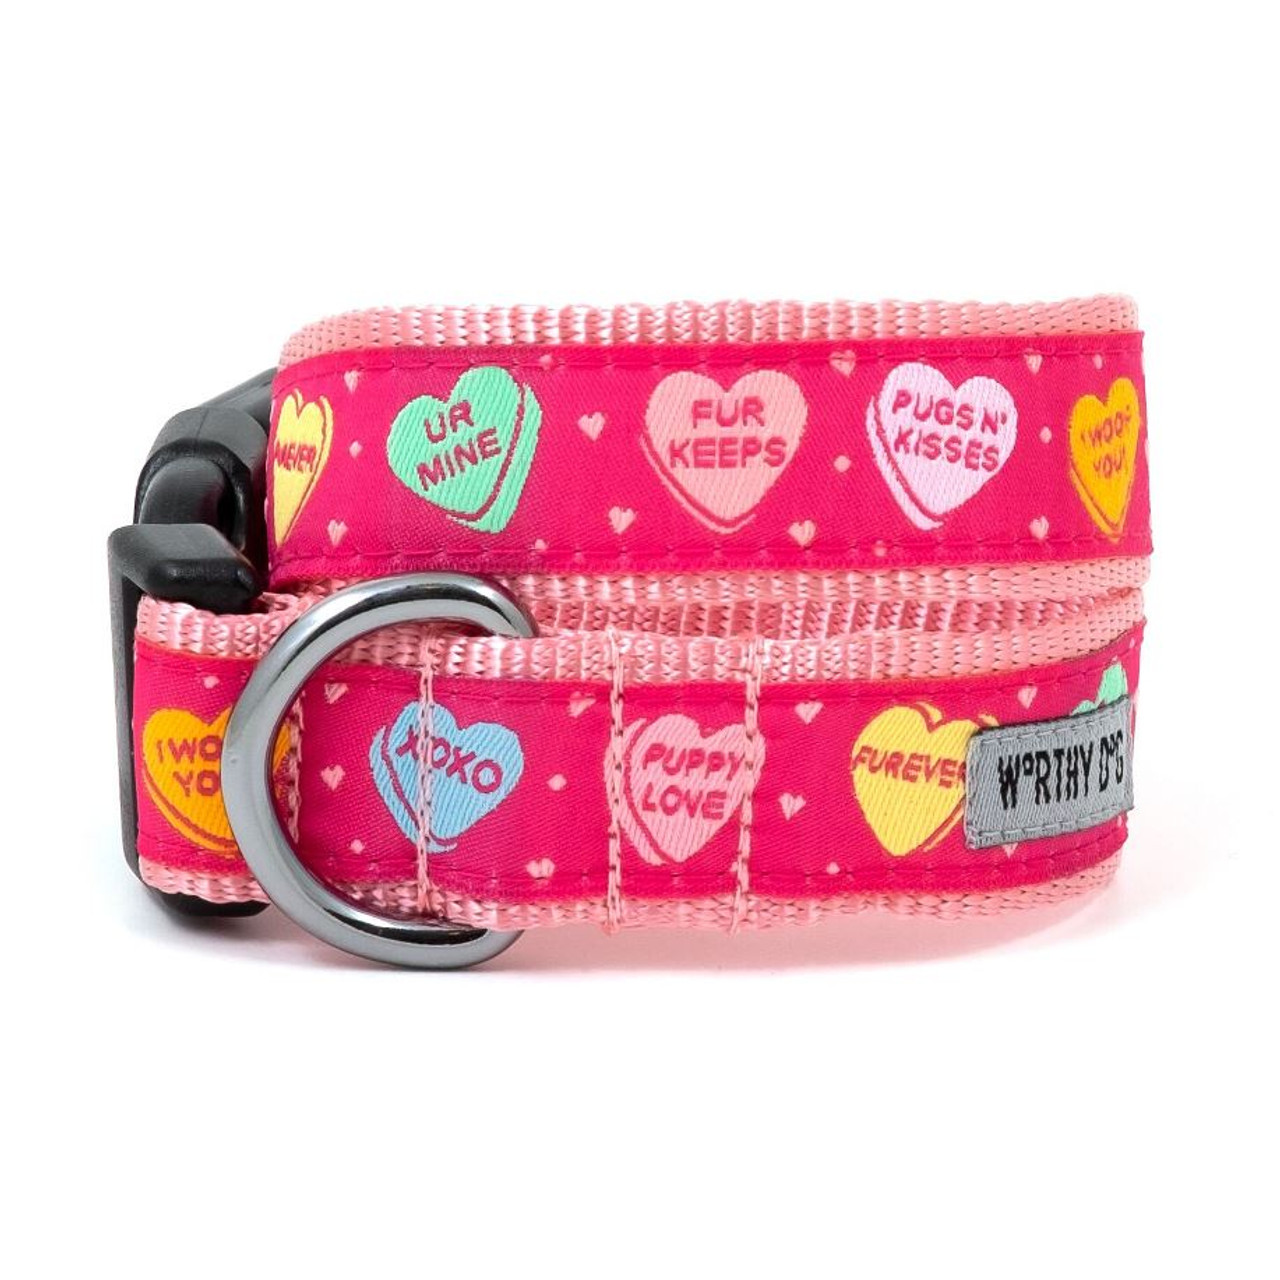 Candy Hearts Dog Collar and Leash | Valentines Day Dog Accessories